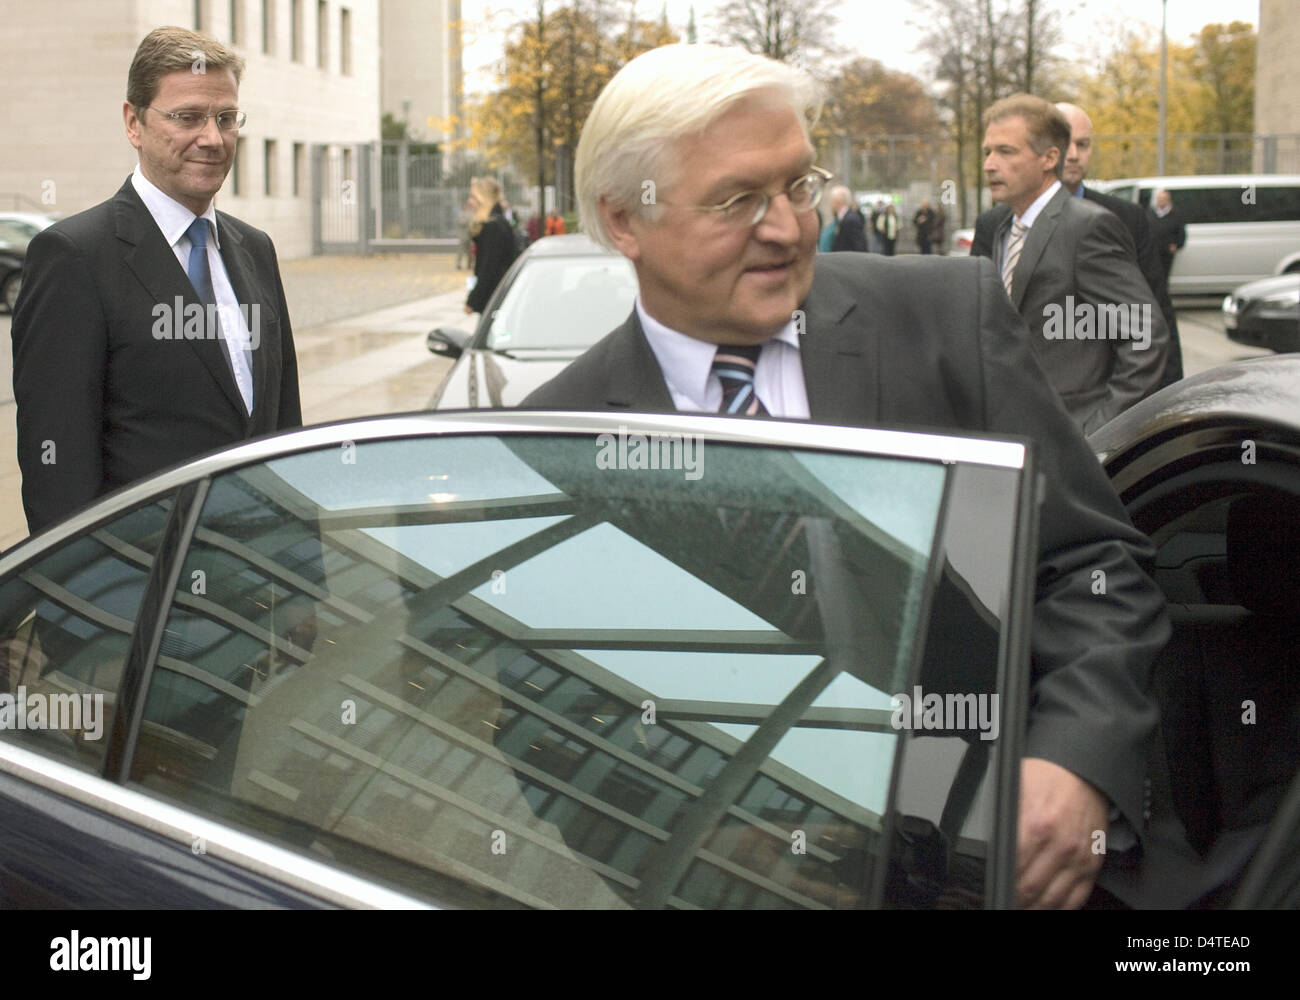 German Foreign Minister Guido Westerwelle (Liberal Democrats, L) watches former German Foreign Minister and Vice Chancellor Frank-Walter Steinmeier (Social Democrats) get into his car in front of the Ministry of Foreign Affairs in Berlin, Germany, 29 October 2009. Photo: ARNO BURGI Stock Photo